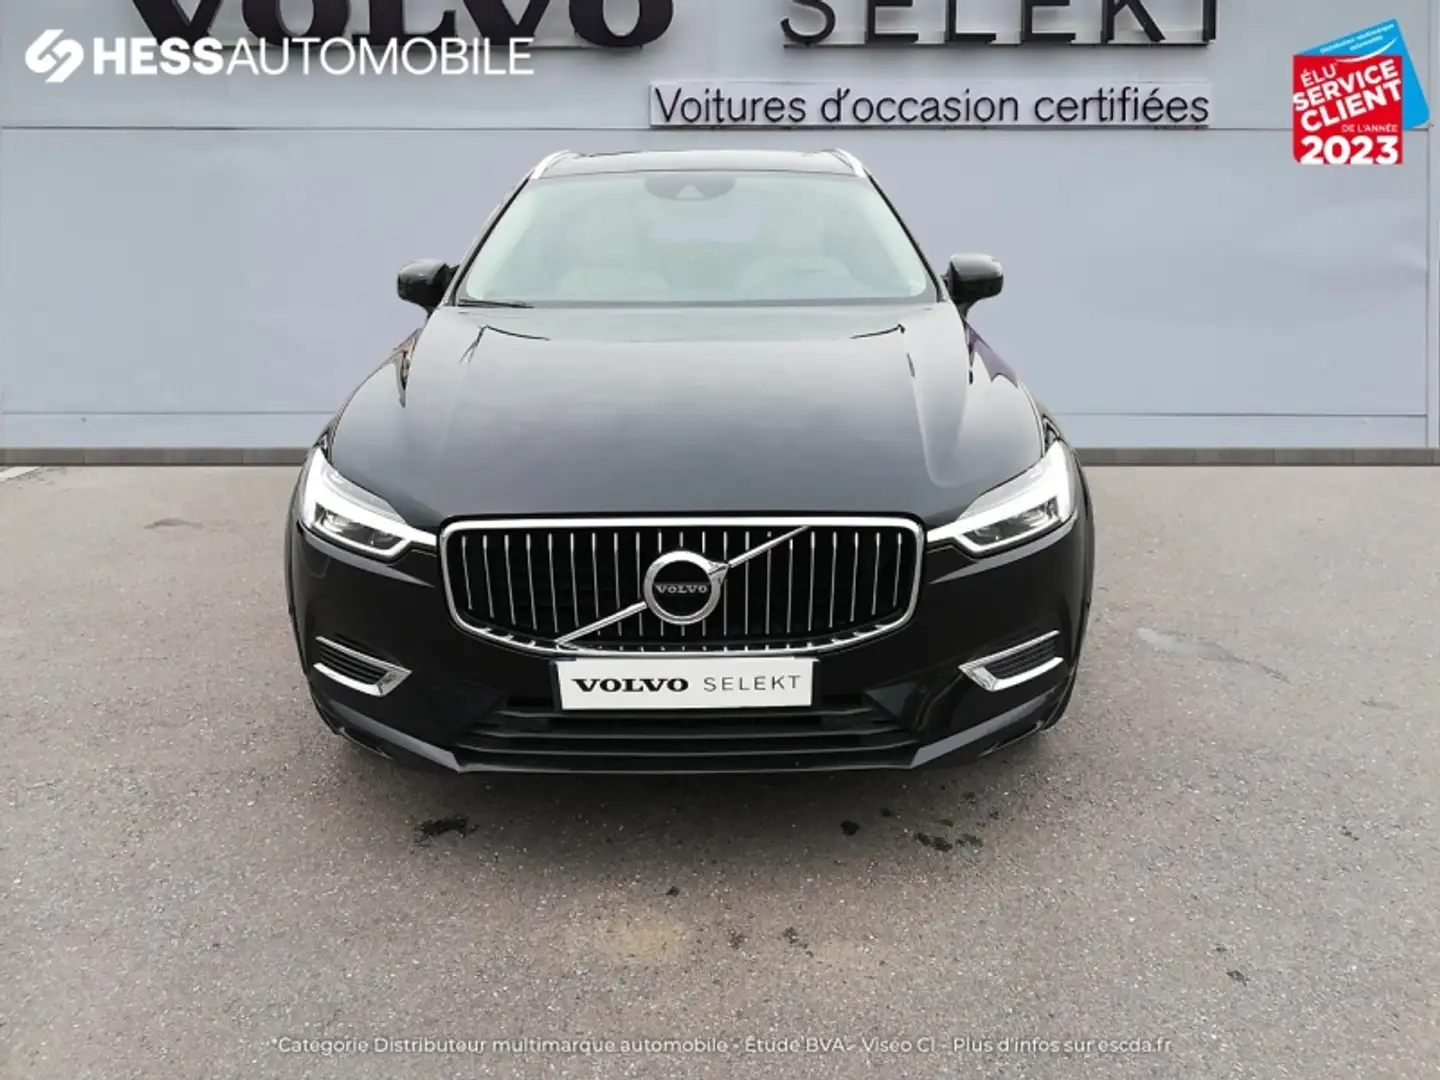 Volvo XC60 T8 Twin Engine 303 + 87ch Inscription Geartronic - 2